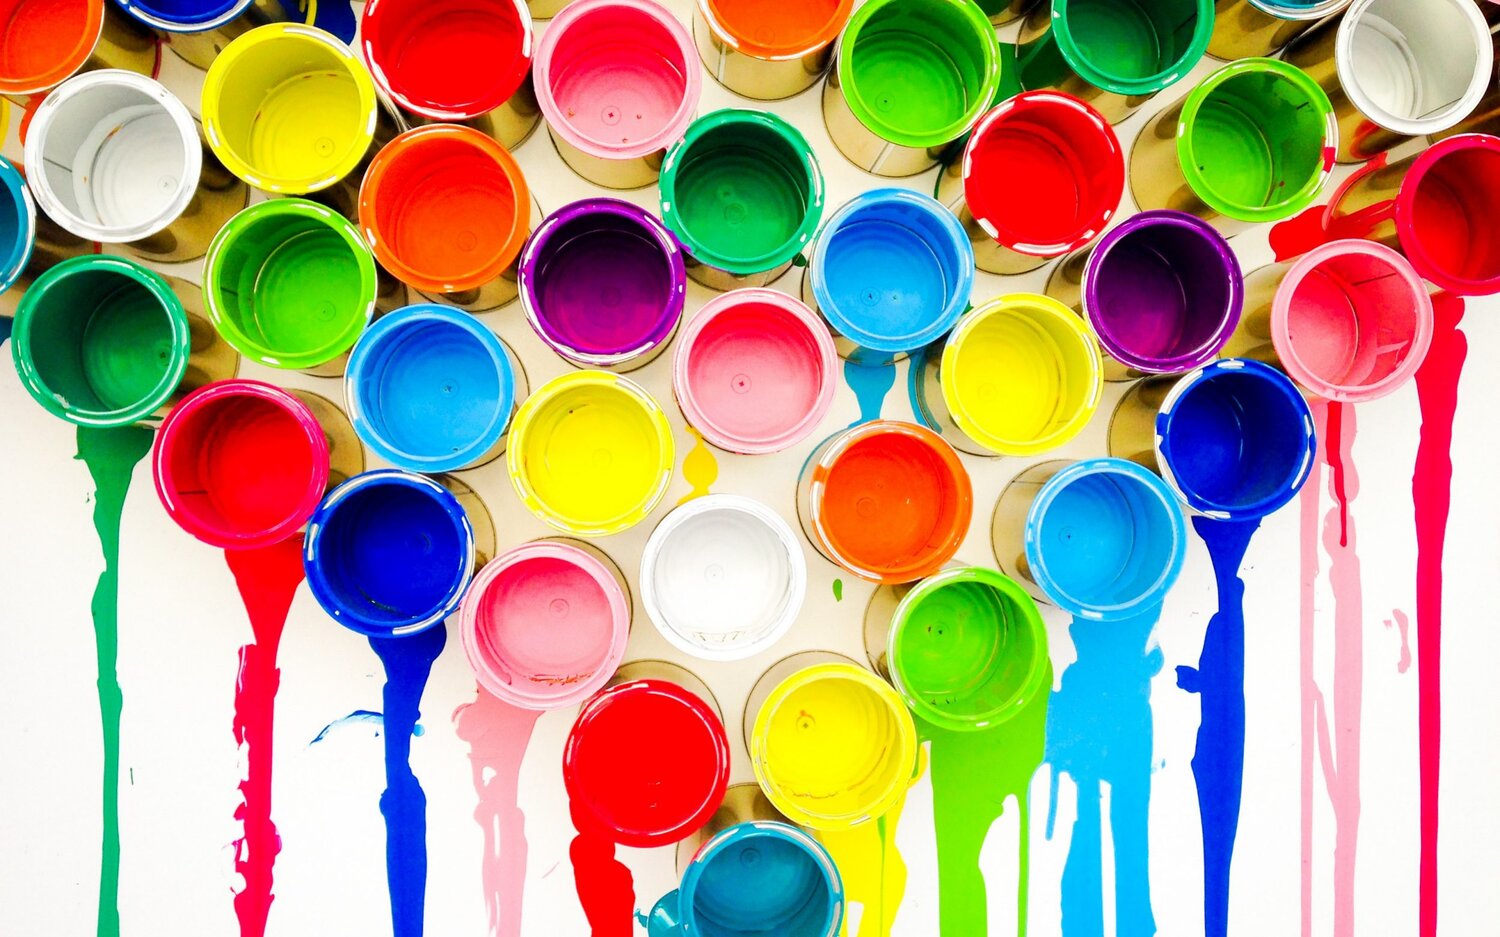 Multiple paint cans of different colors dripping paint